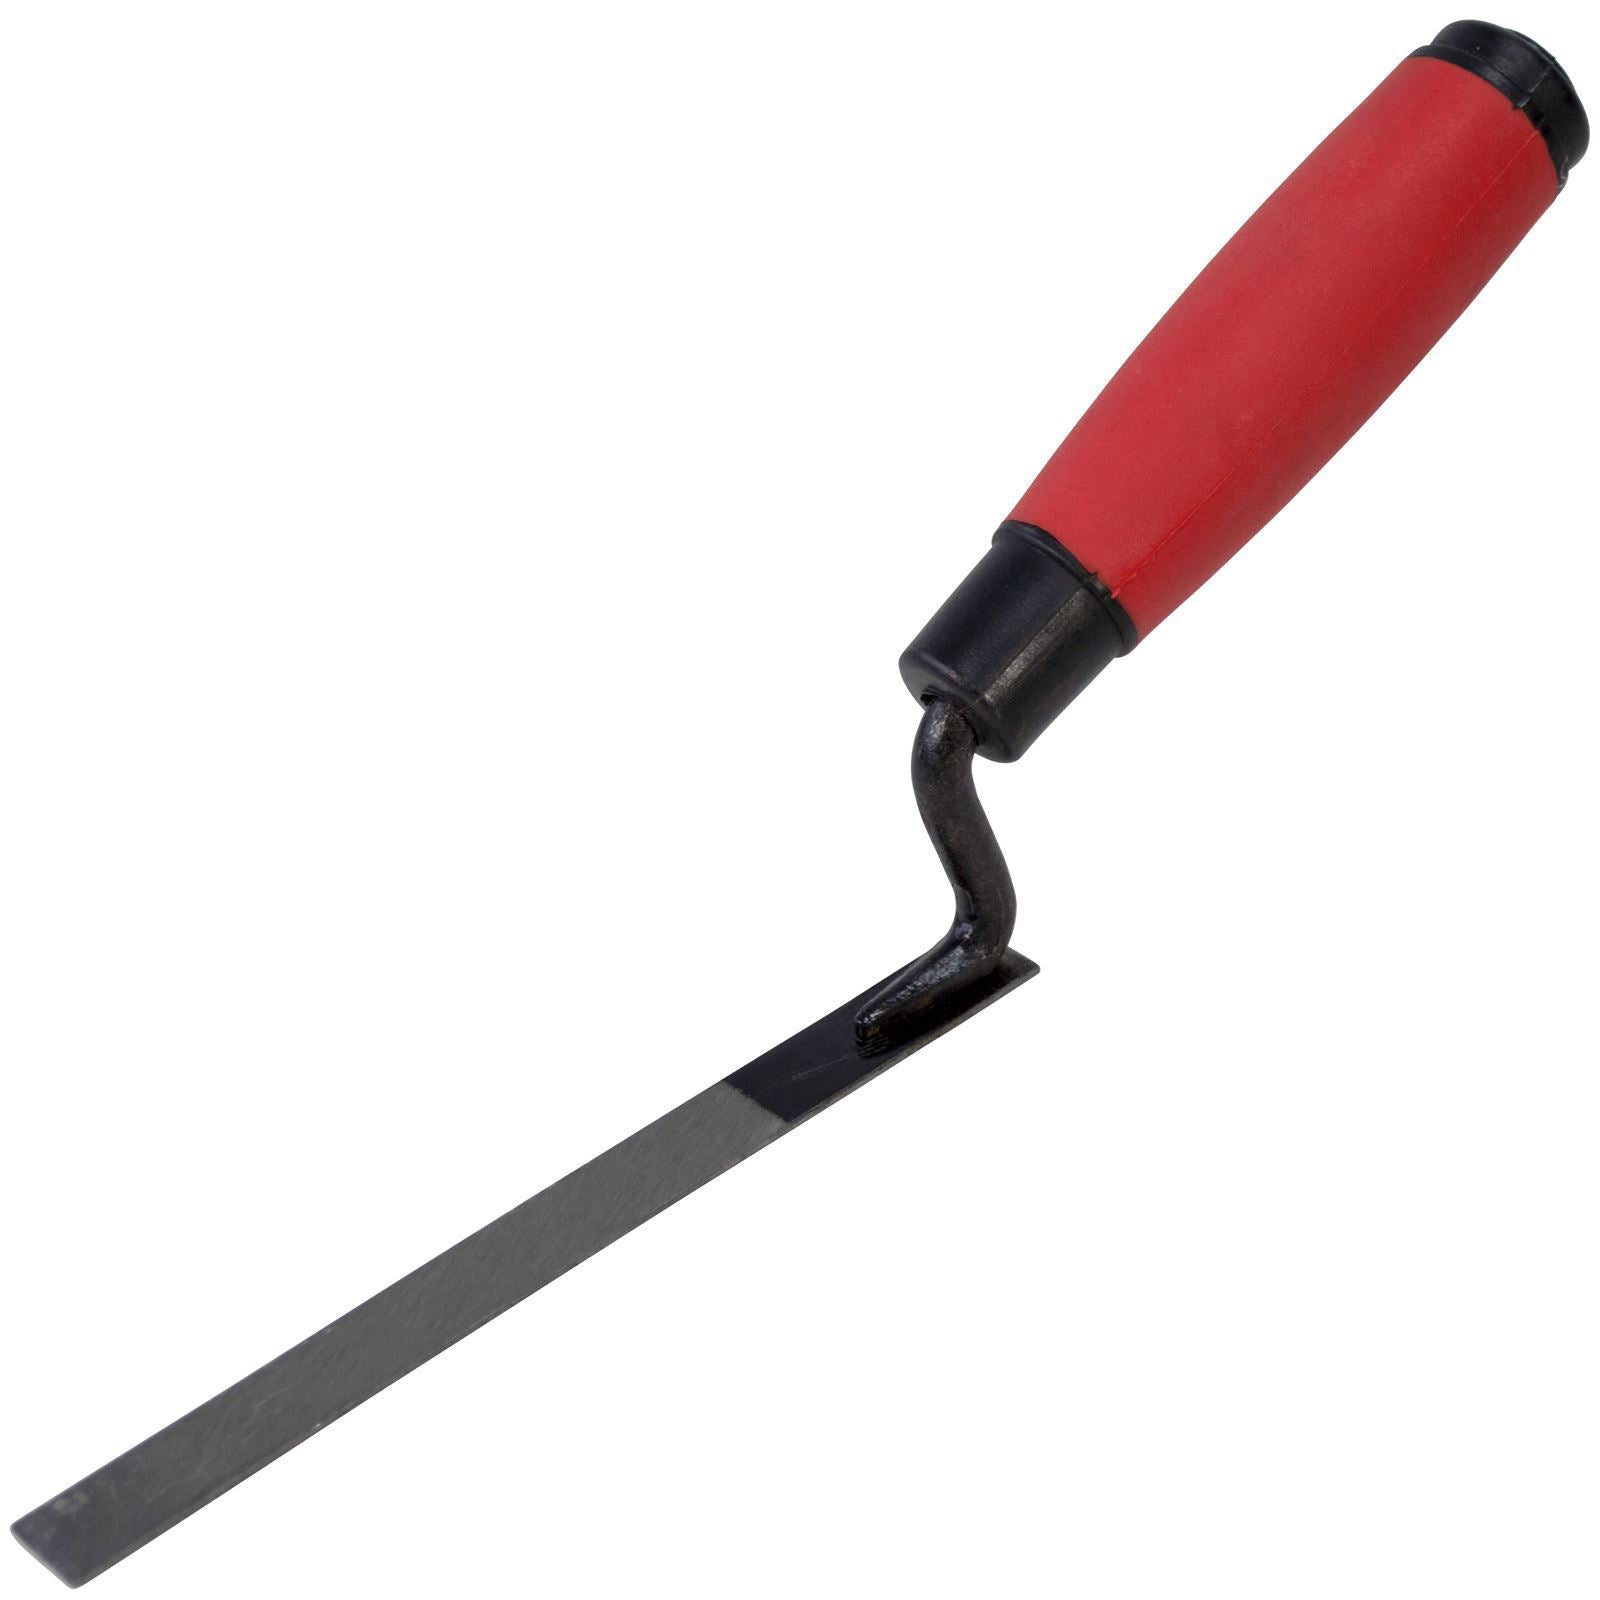 Amtech 160 x 13mm Tuck Pointer Trowel with Soft Grip Handle